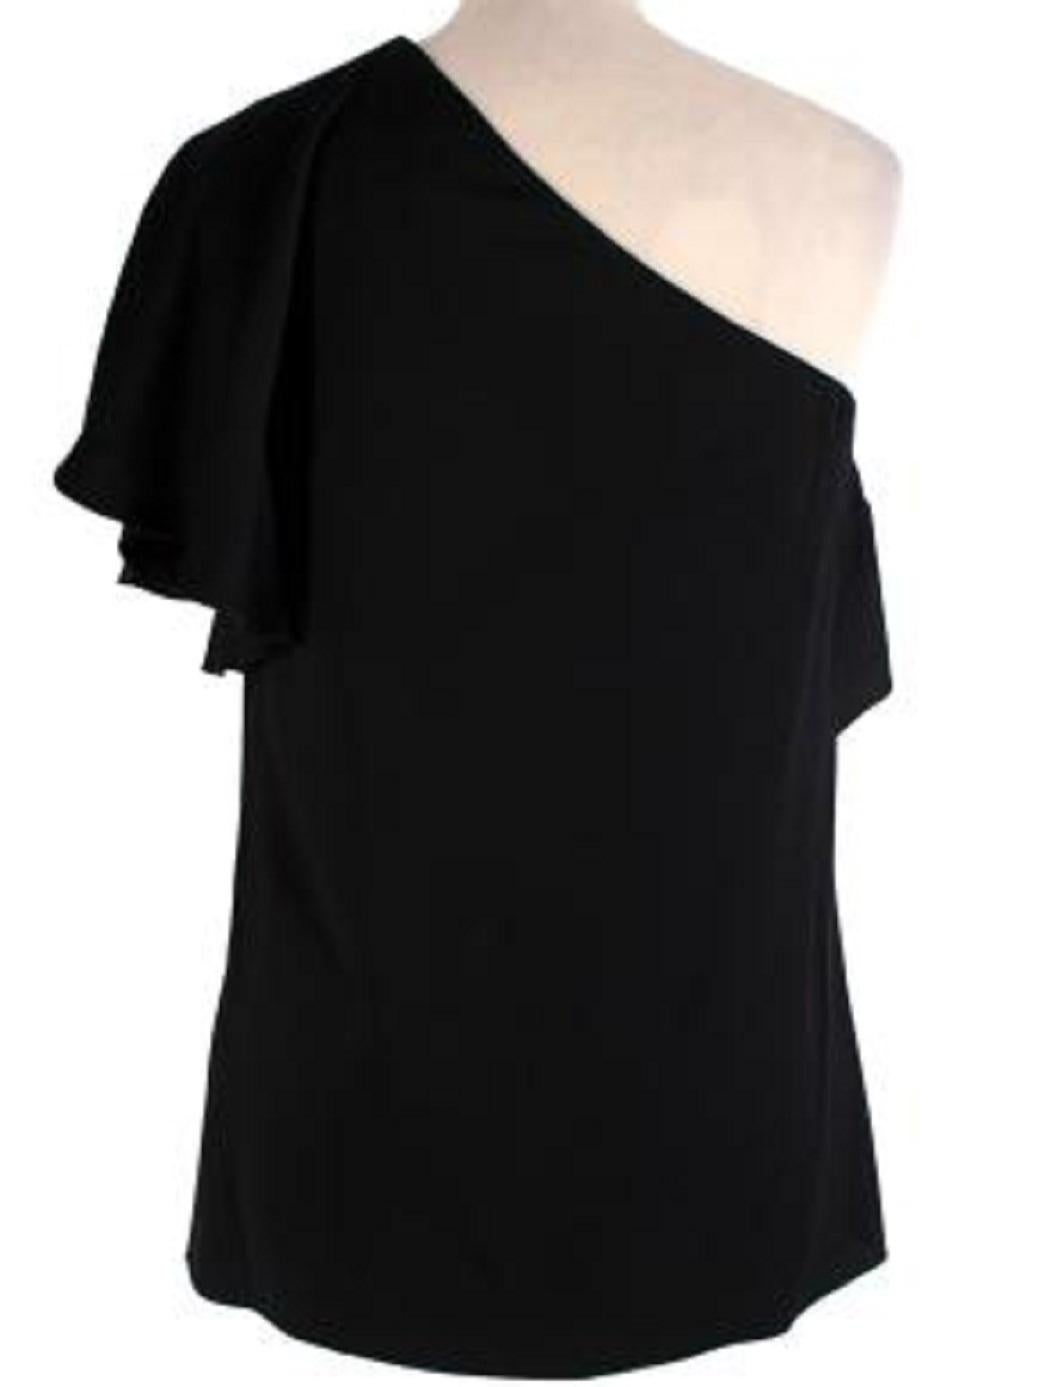 Lanvin Black crepe one-shoulder top

- One shoulder blouse with ruffled trim
-Zip fastening along the side

Material: 
58% Viscose 
42% Acetate 

Made in Romania 

PLEASE NOTE, THESE ITEMS ARE PRE-OWNED AND MAY SHOW SIGNS OF BEING STORED EVEN WHEN